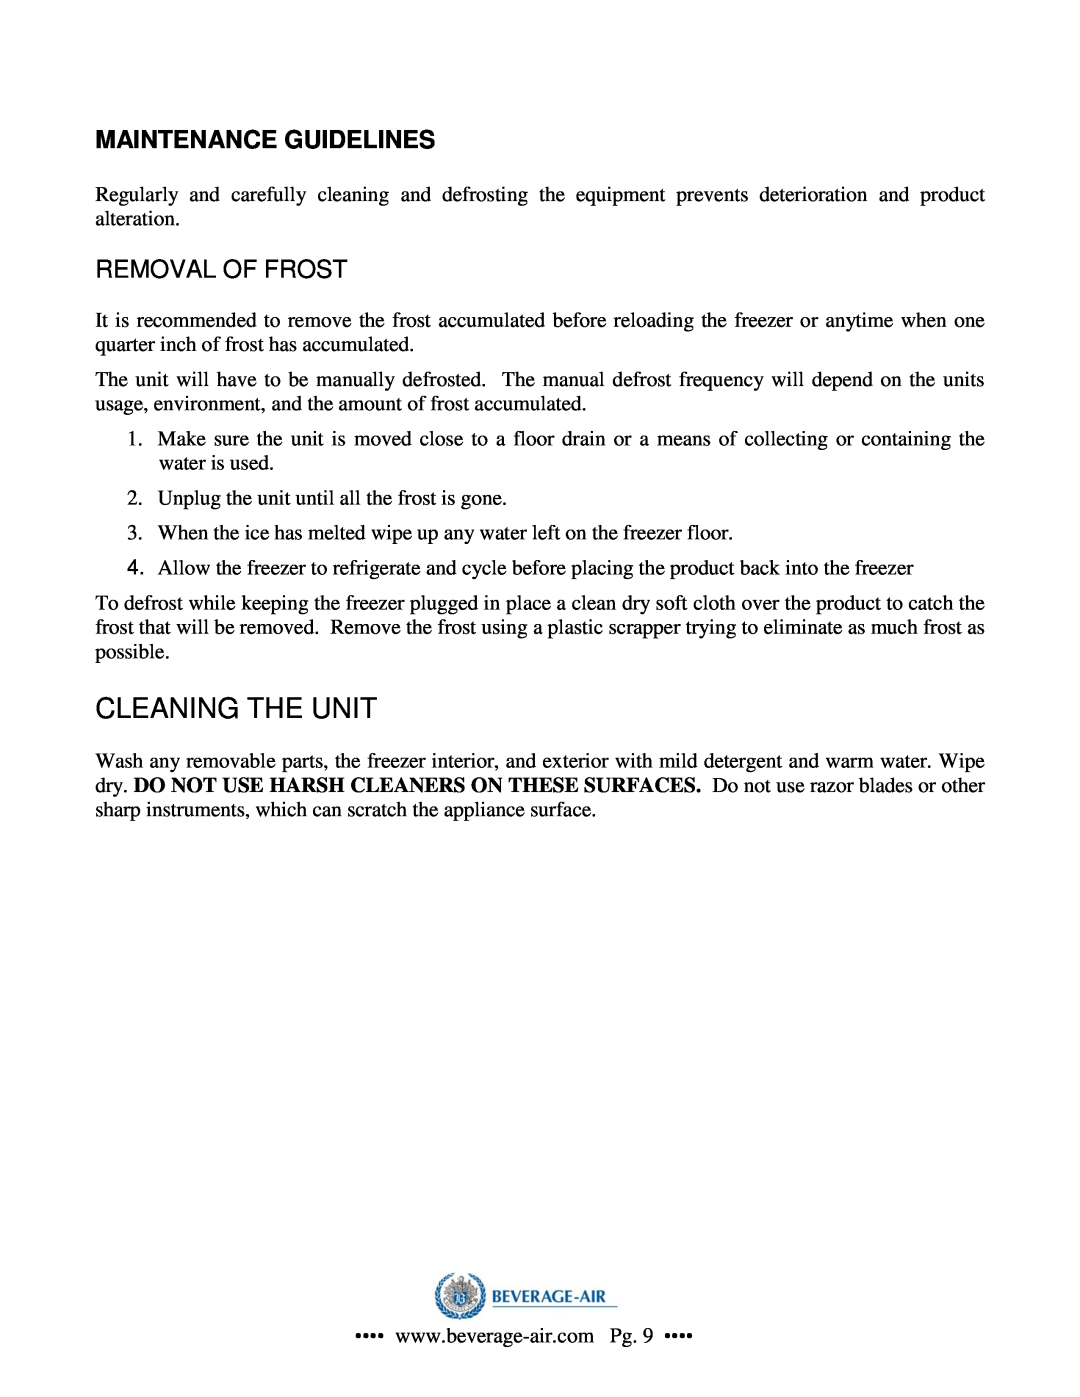 Beverage-Air CF-3 operation manual Maintenance Guidelines, Cleaning The Unit 